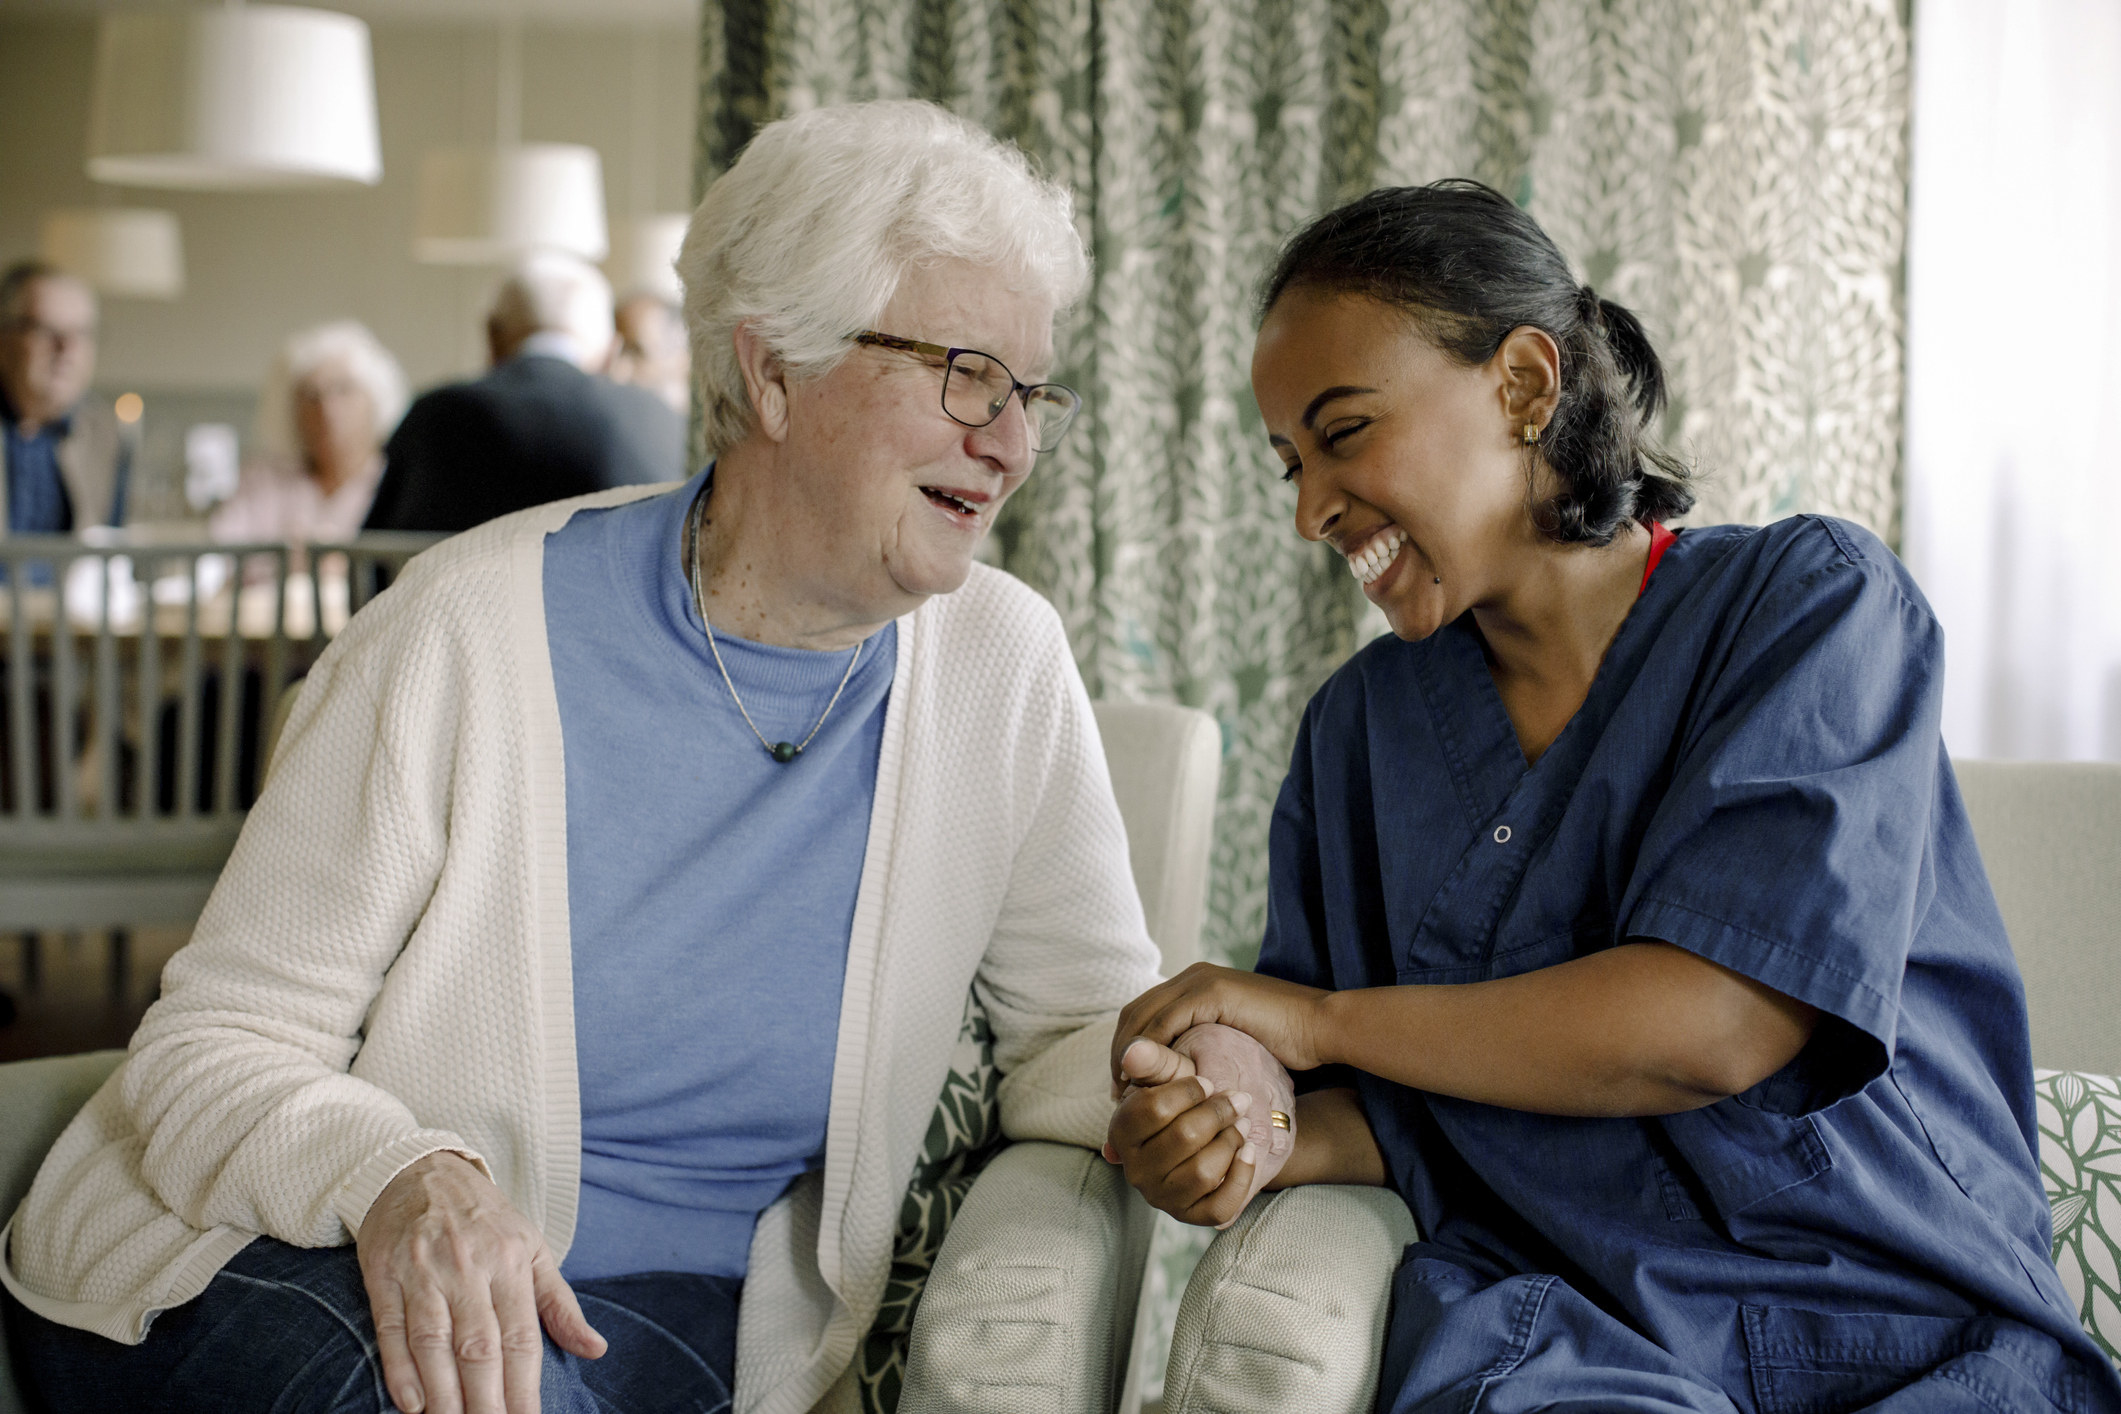 A healthcare worker with an older person